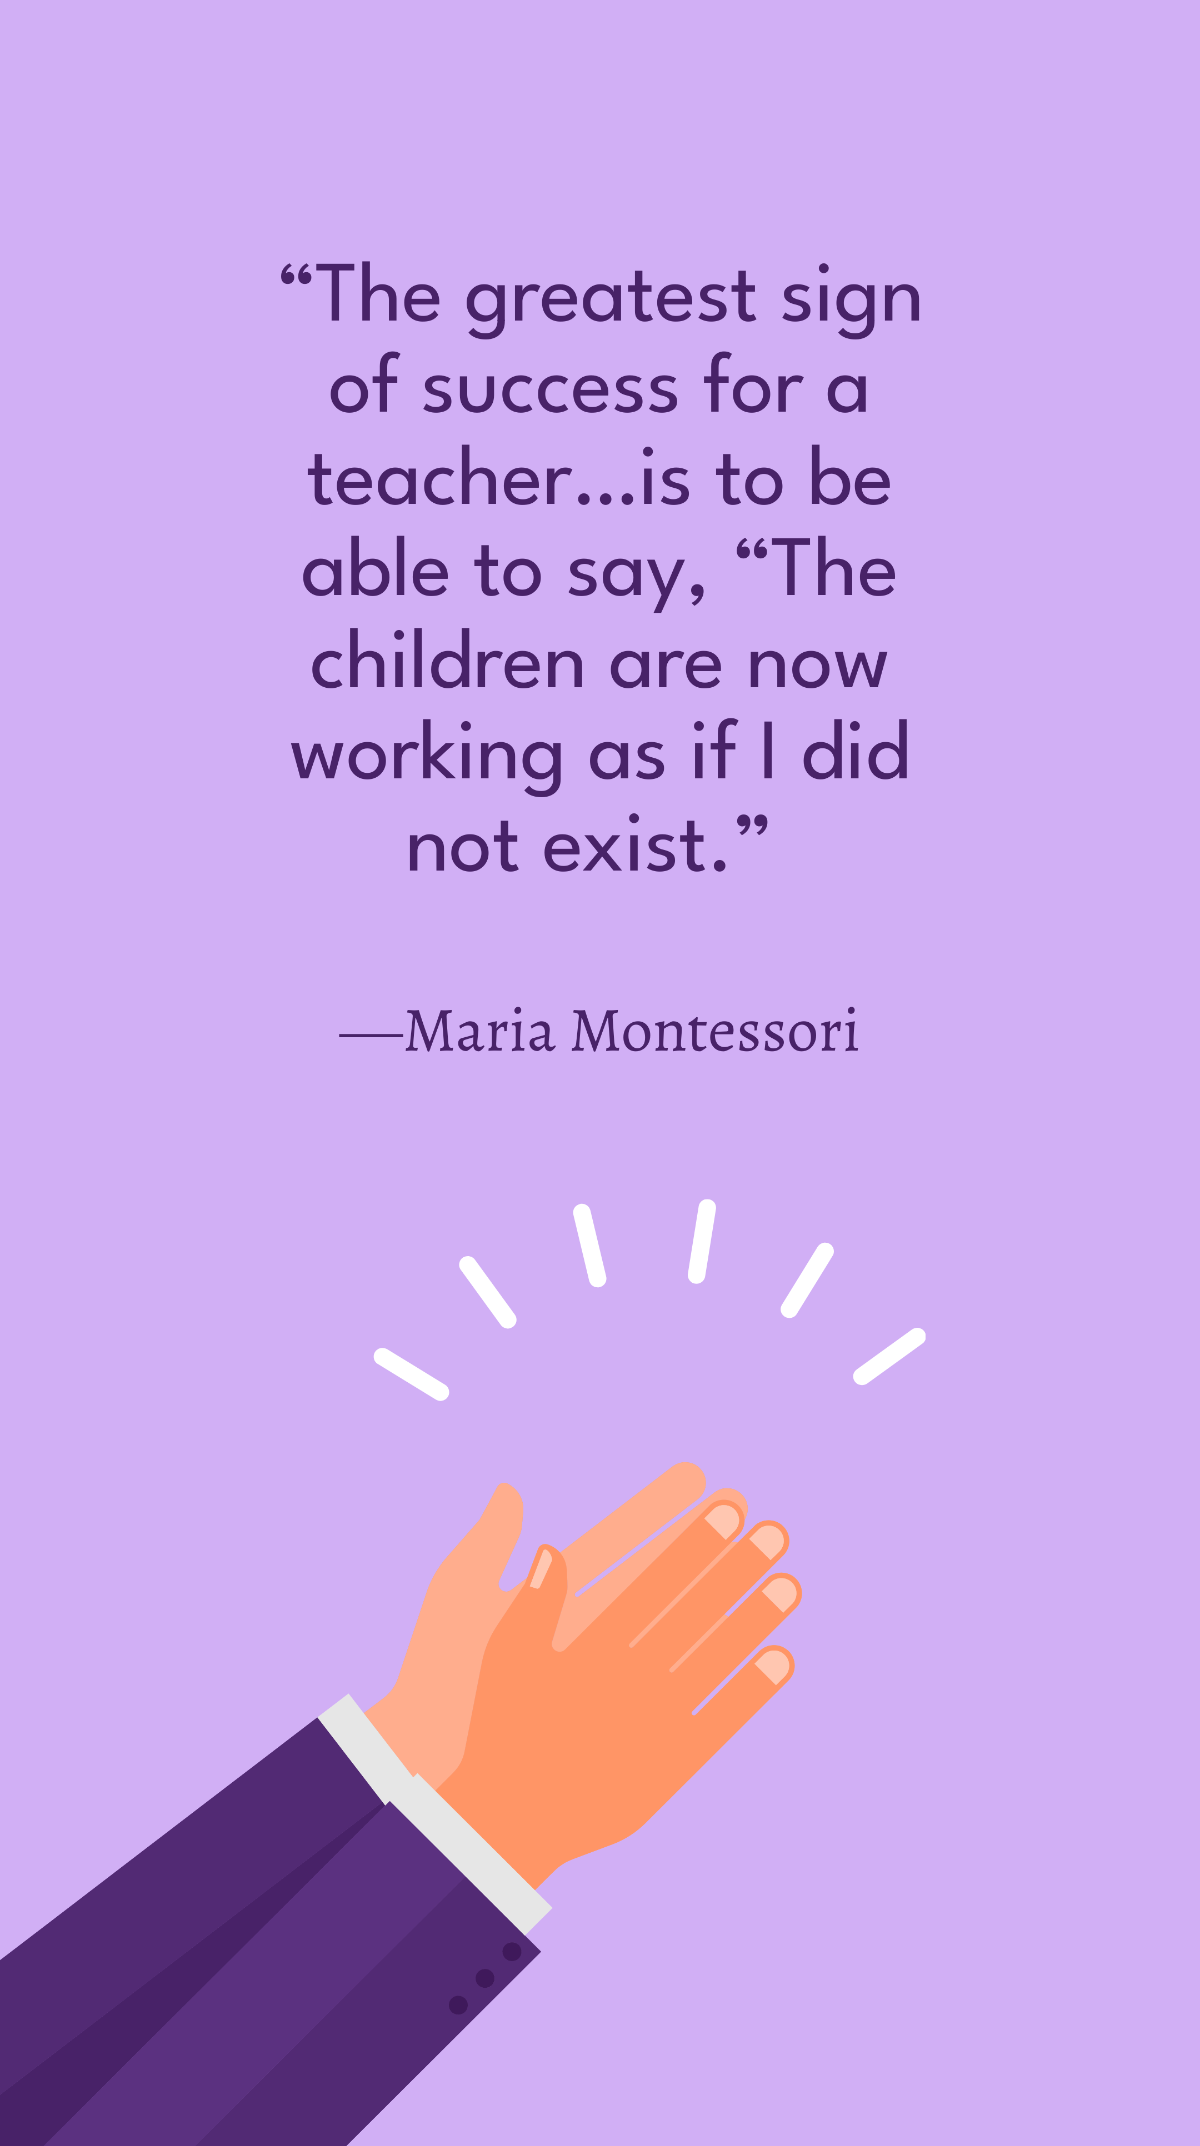 Maria Montessori - The greatest sign of success for a teacher…is to be able to say, “The children are now working as if I did not exist. Template